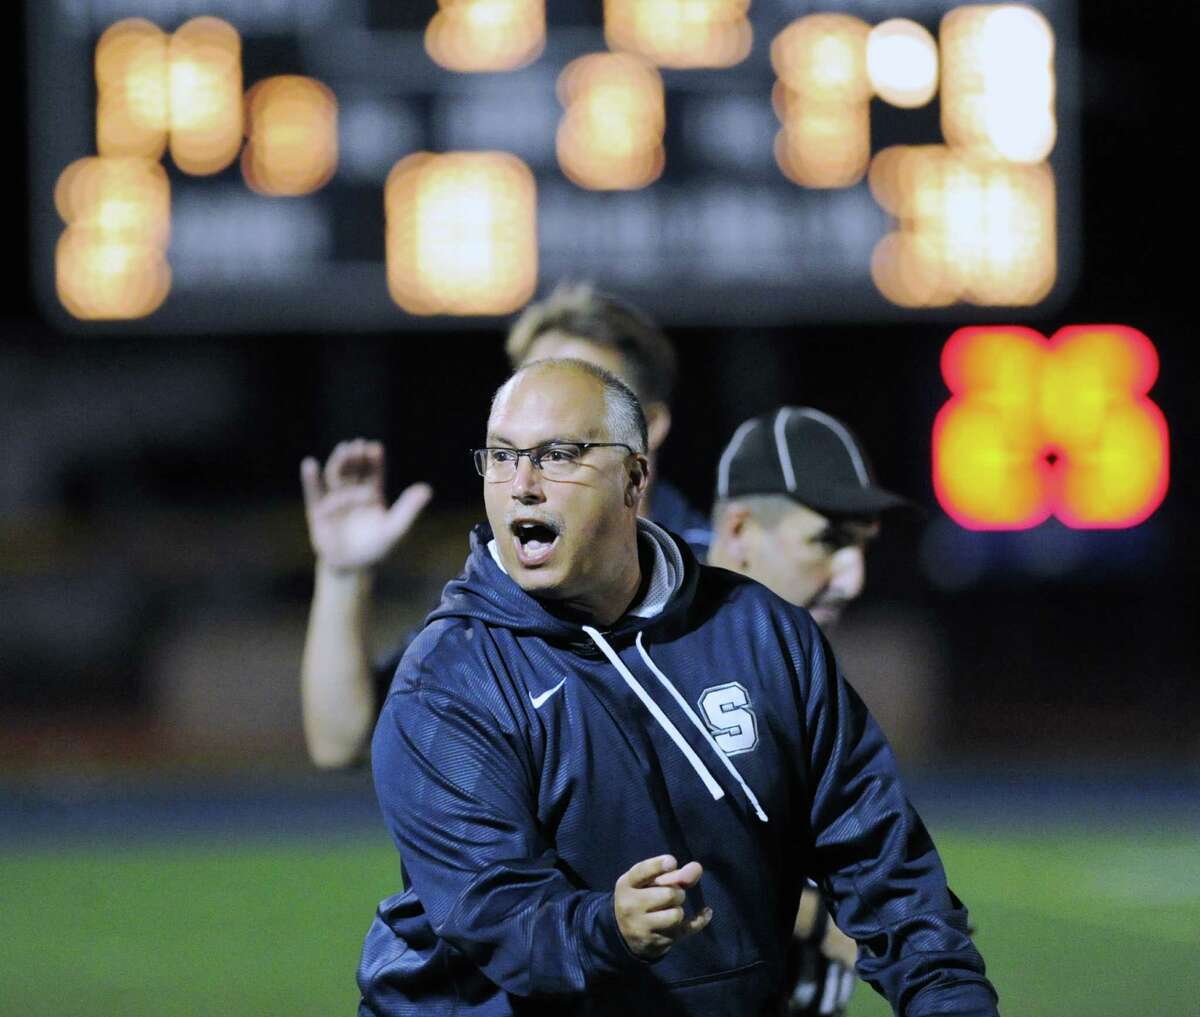 Staples High School Head Football Coach Marce Petroccio reacts after his team scored its second touchdown of the game during high school football game between Staples High School and Bridgeport Central High School at Staples in Westport, Friday night, Sept. 21, 2012.